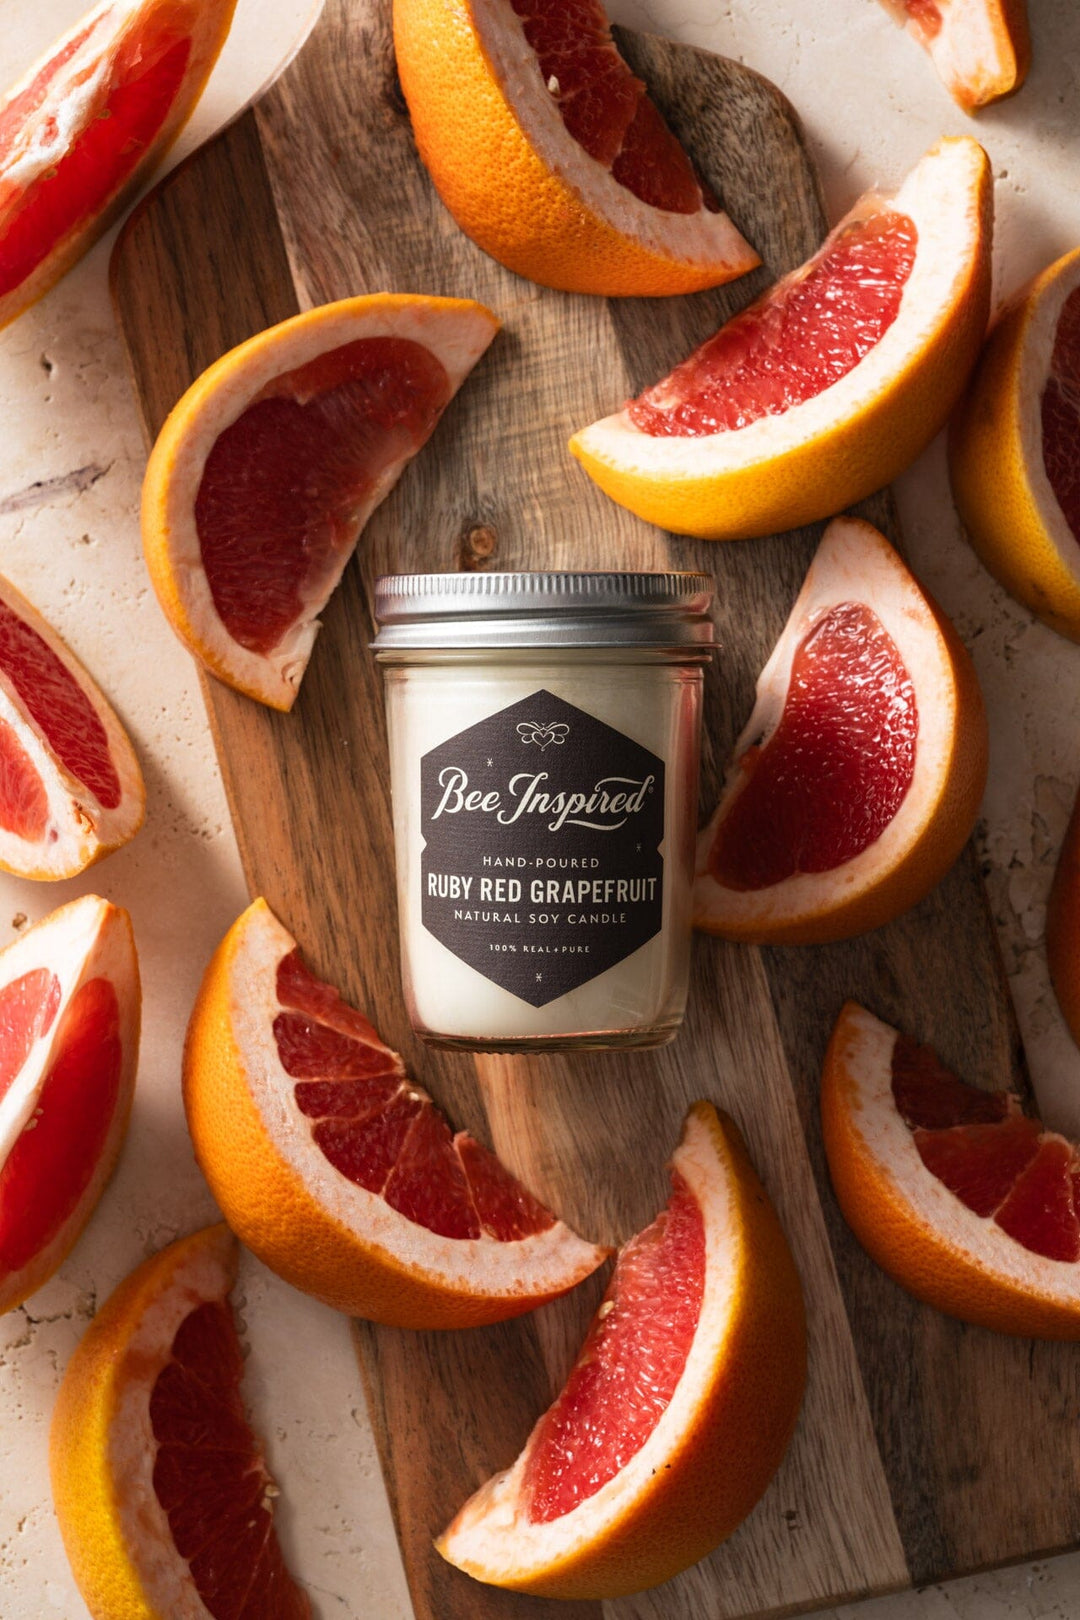 Ruby Red Grapefruit Jelly Jar Candle surrounded by grapefruit on a cutting board tall pin